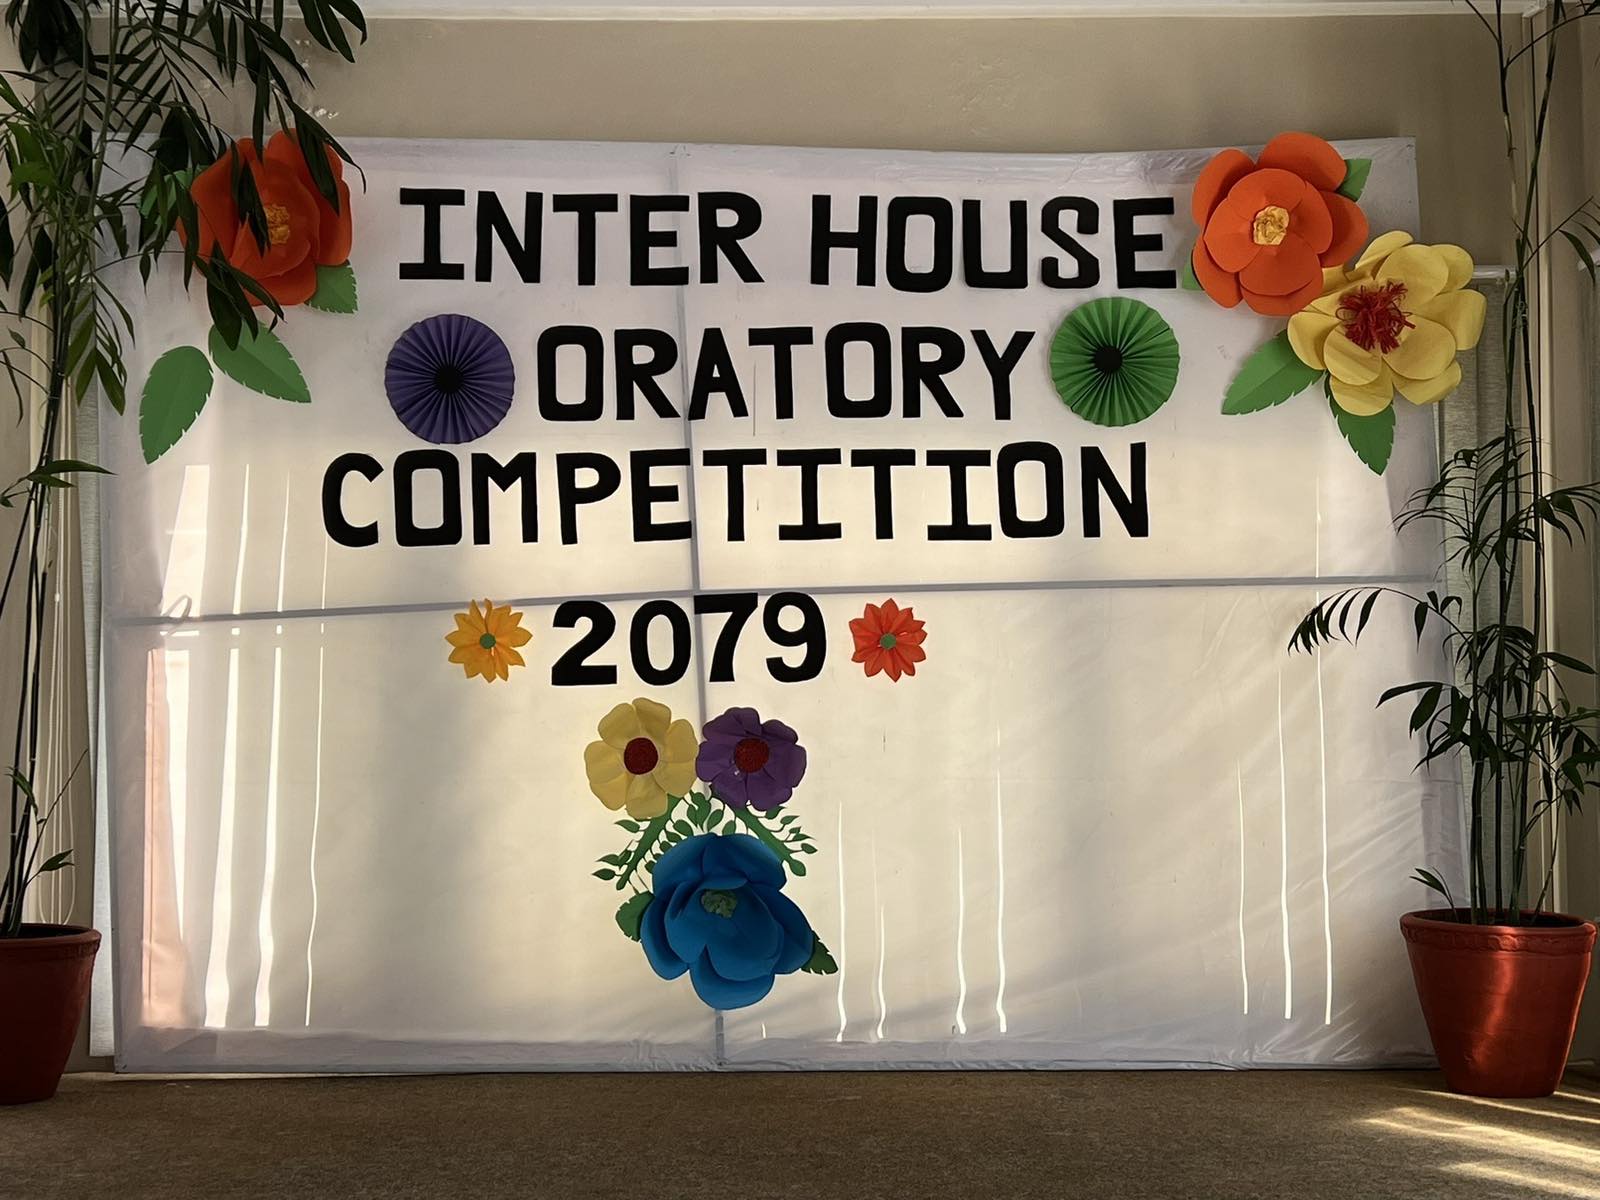 Oratory Competition 2079